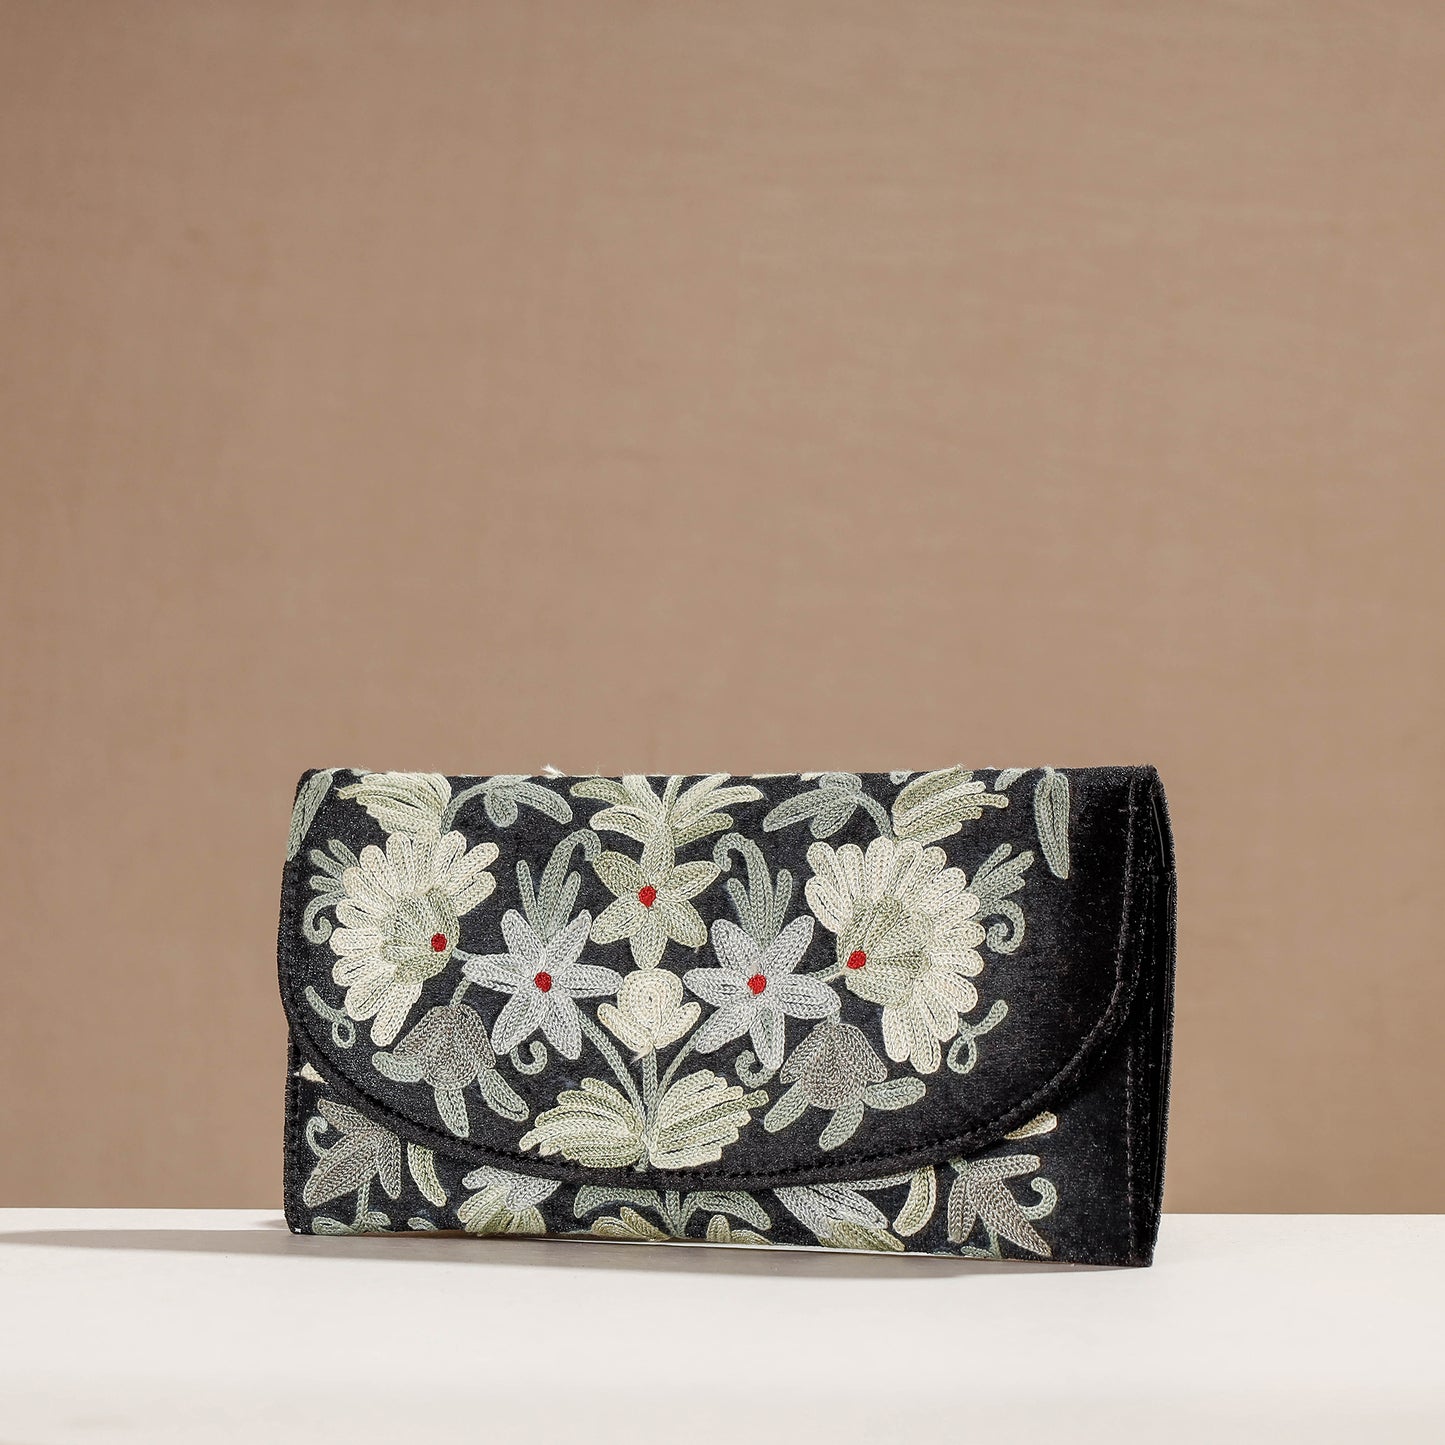 Original Chain Stitch Embroidery Leather & Velvet Wallet